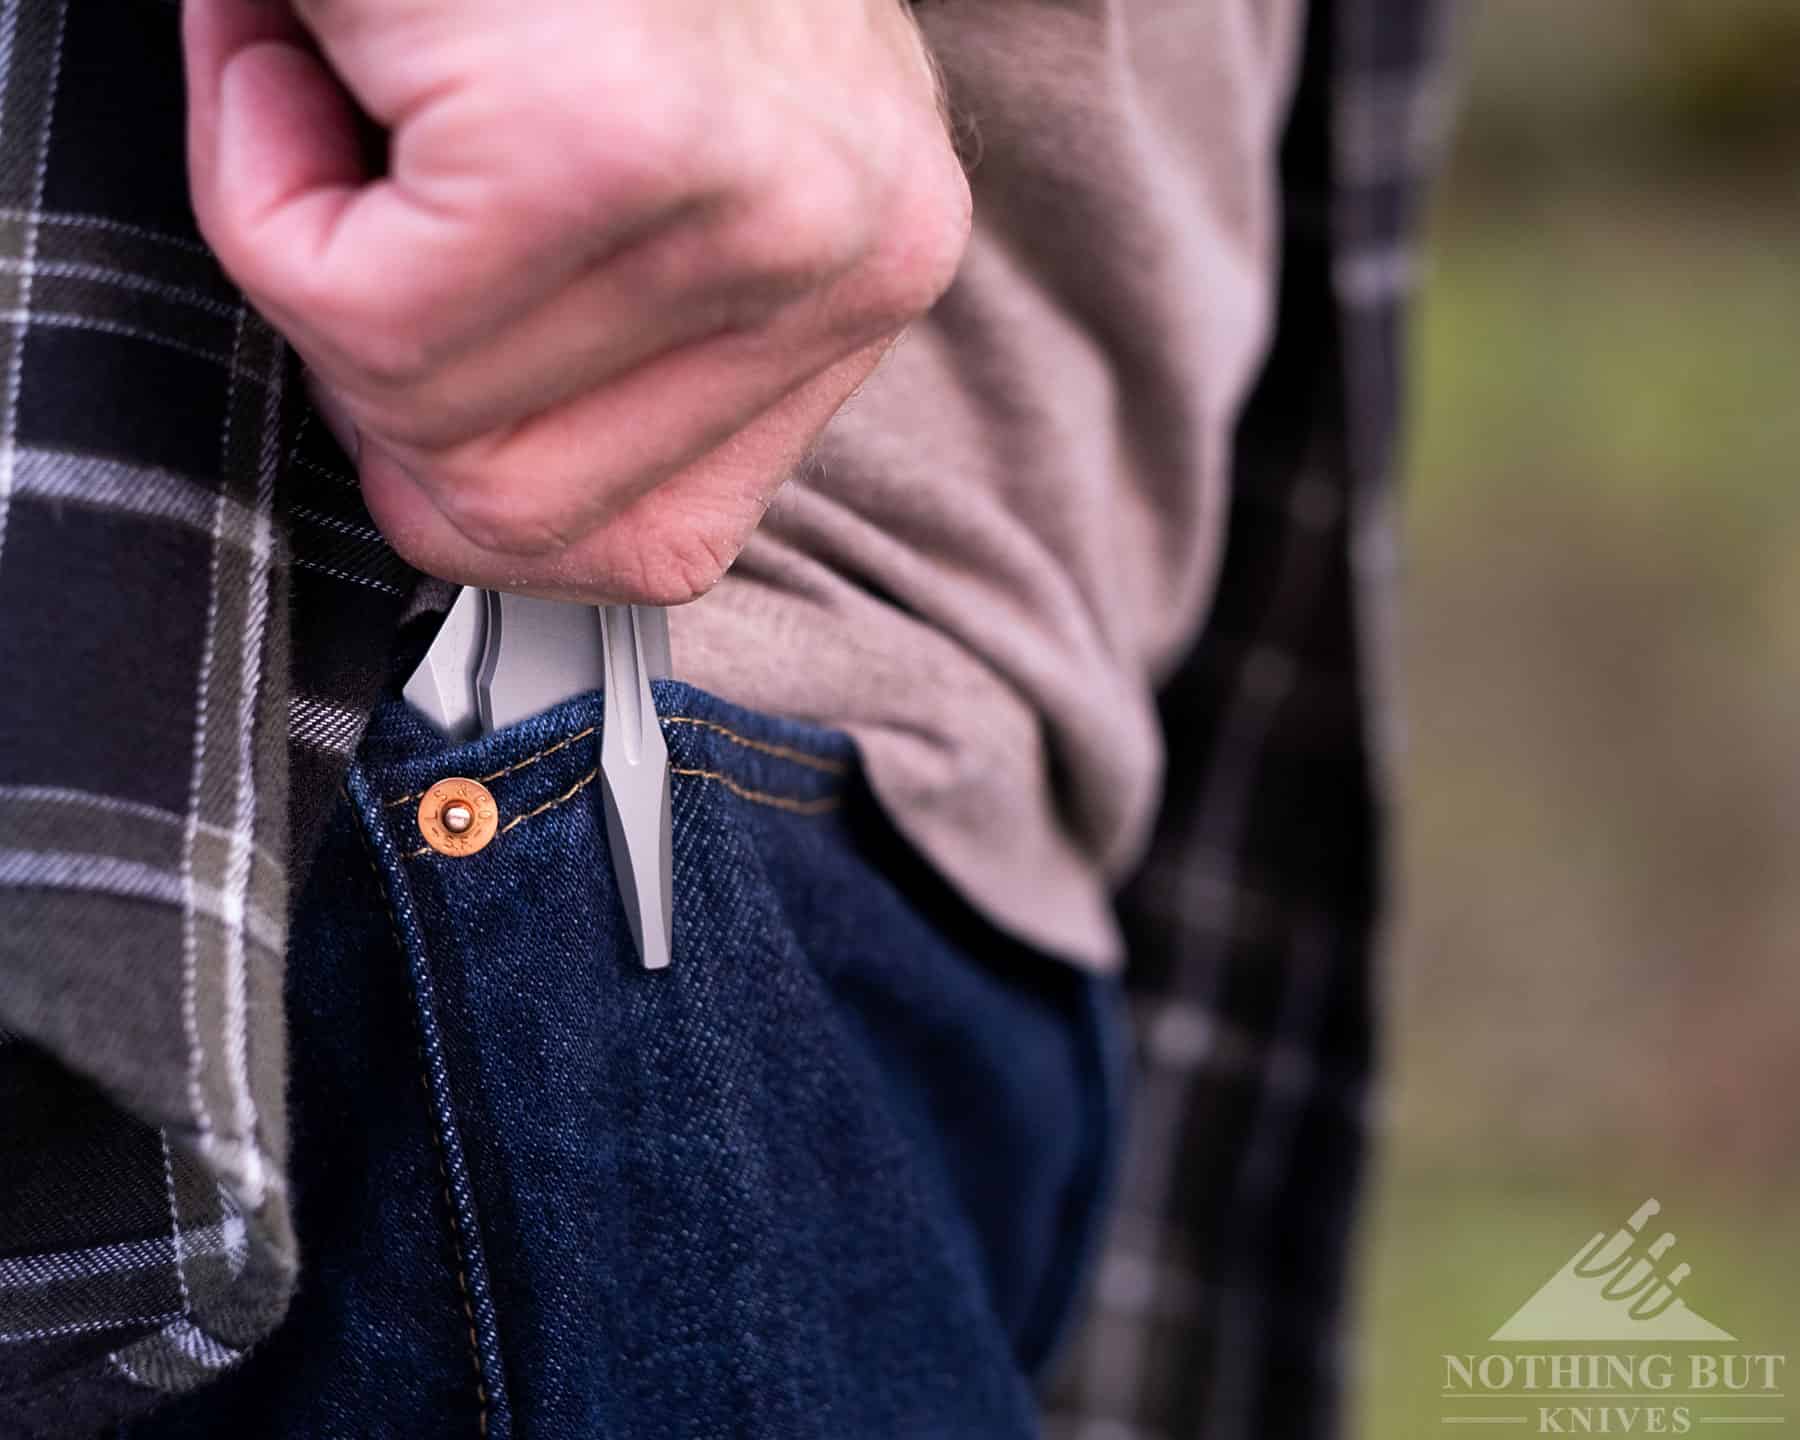 The pocket clip of this Katsu folding knife has good retention without being to difficult to remove from the pocket.